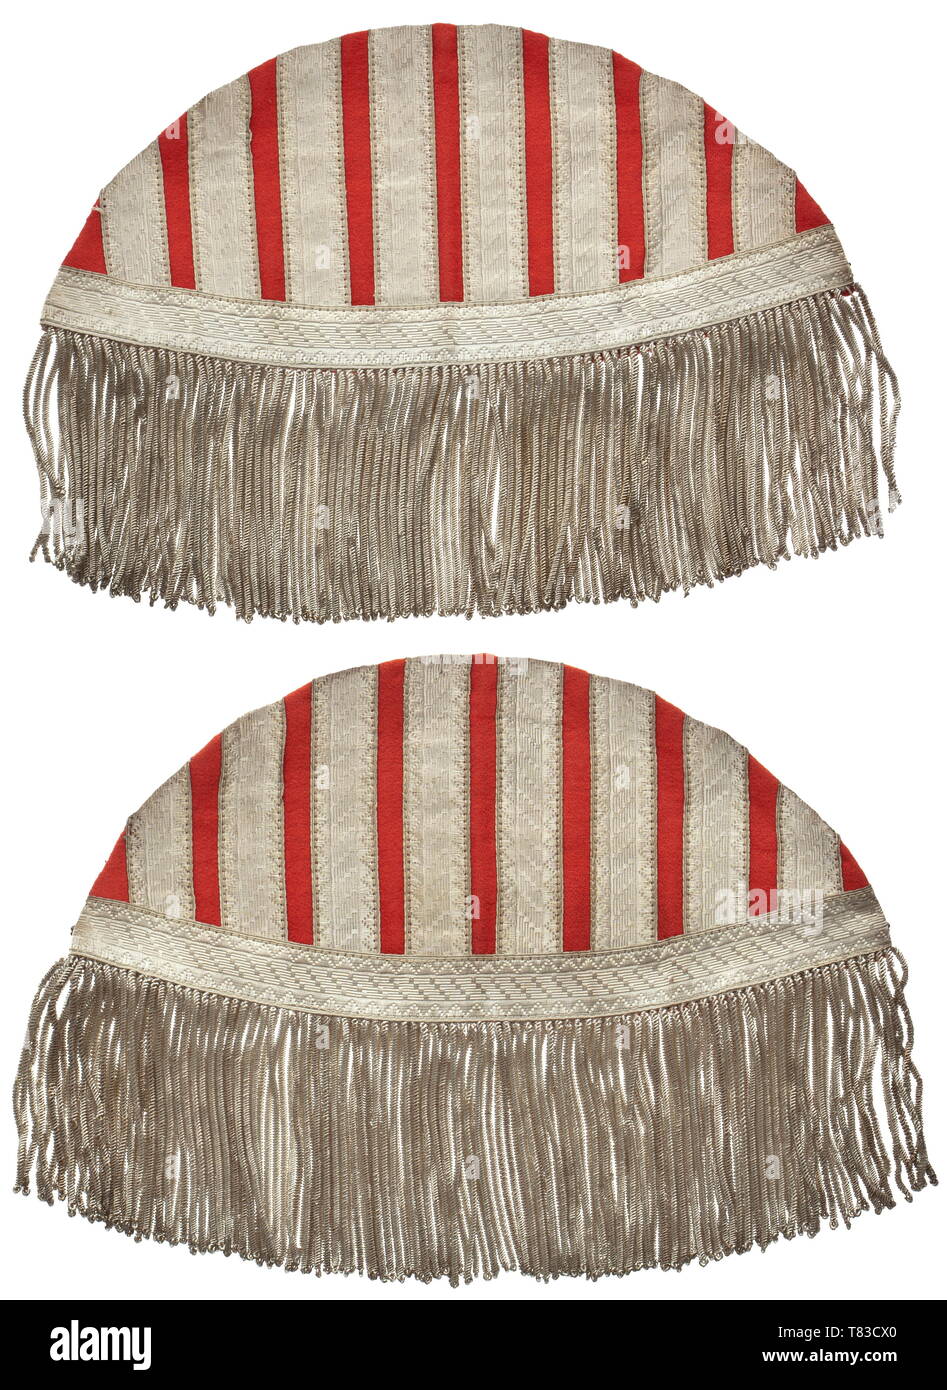 A uniform of an army bandmaster A visor cap for officers, red piping, aluminium cockade and eagle, hand-embroidered oak leaves. Brown-orange coloured liner with the maker's identification 'Deutsche Wertarbeit, Sonderklasse'. Improved field tunic of gabardine in officer's quality. Button-on collar, the inside pocket with the sewn tailor's label 'Averbeck & Bröskamp, Berlin' and handwritten inscription 'Unteroffz. Hagen Nr. 4078 Okt. 1934'. Sewn-on shoulder boards for army bandmasters with red interweaves and backing. Officer's eagle, lanyard, appl, Additional-Rights-Clearance-Info-Not-Available Stock Photo